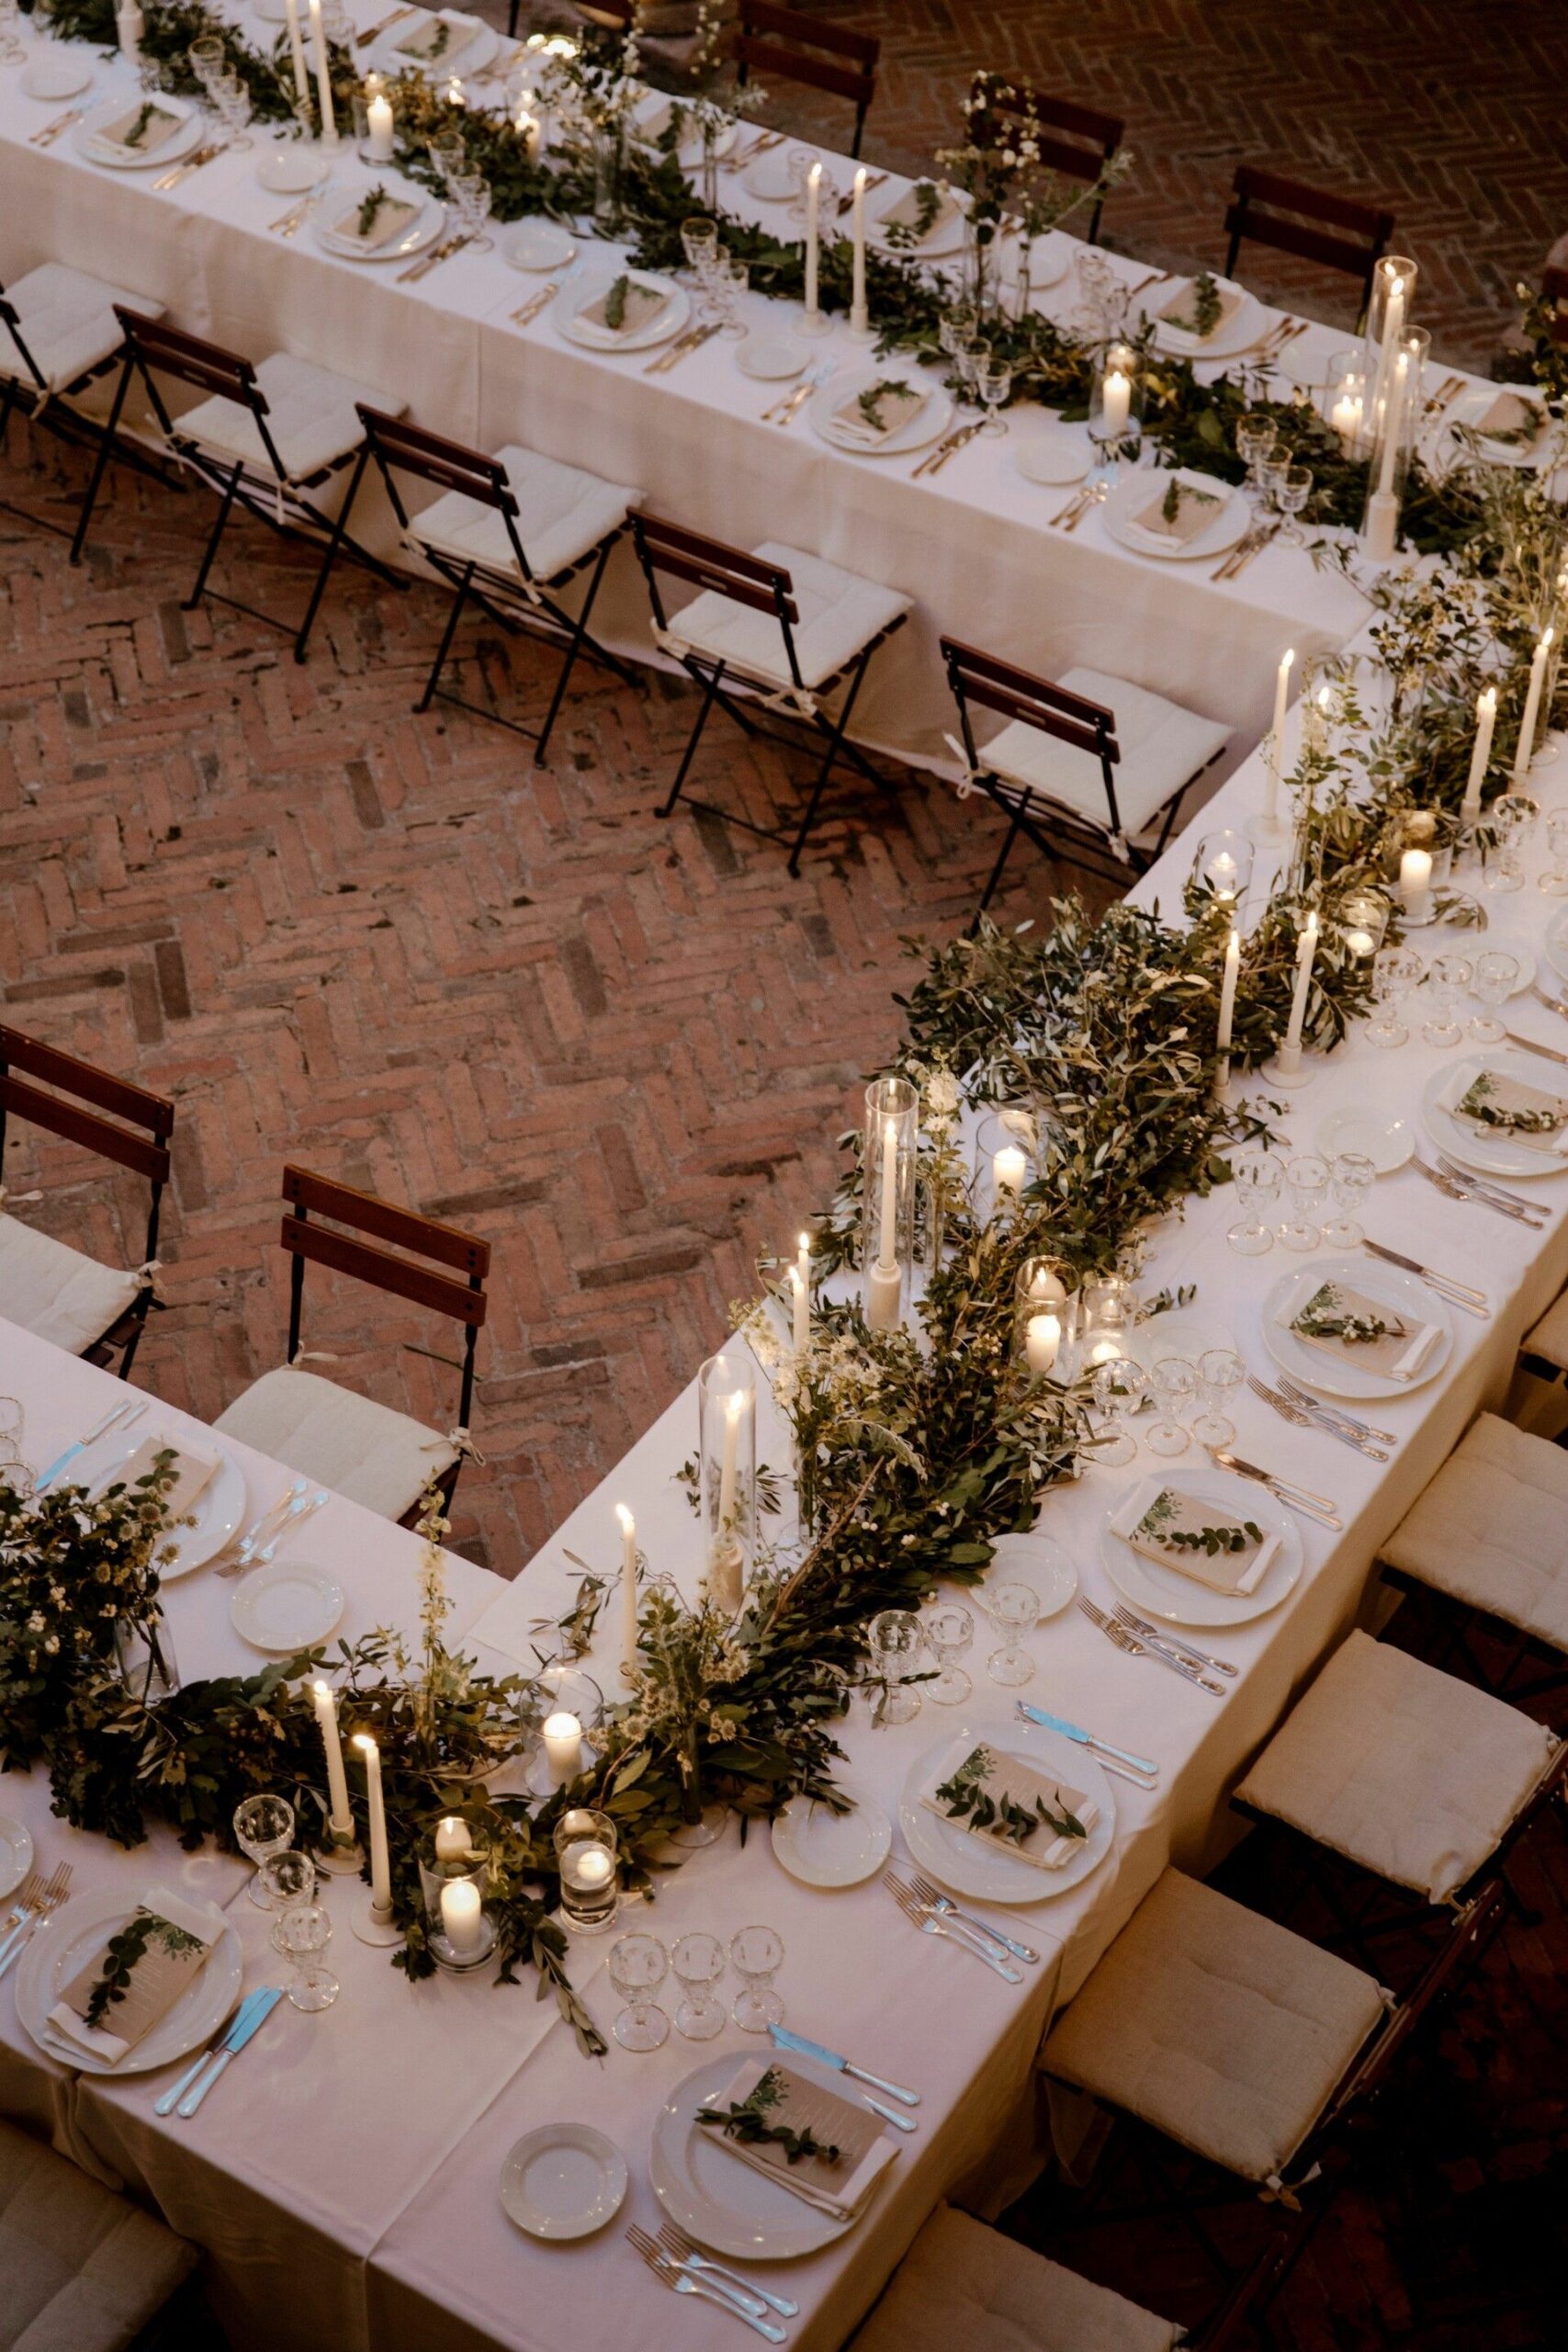 Choosing and dressing banquet tables